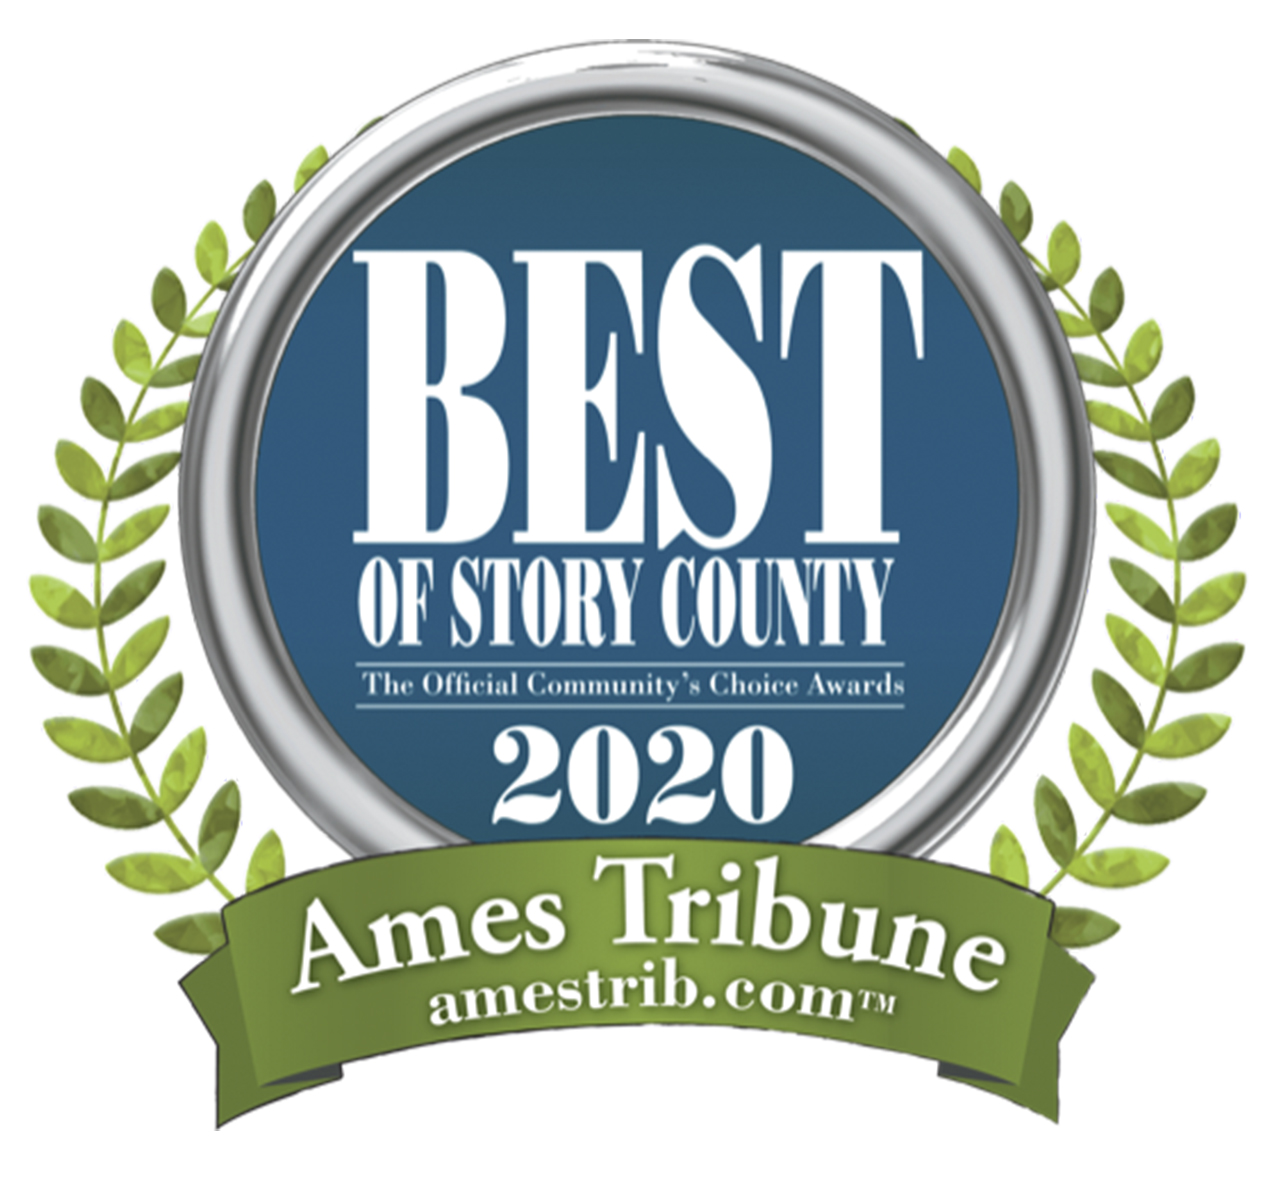 Best of Story County 2020